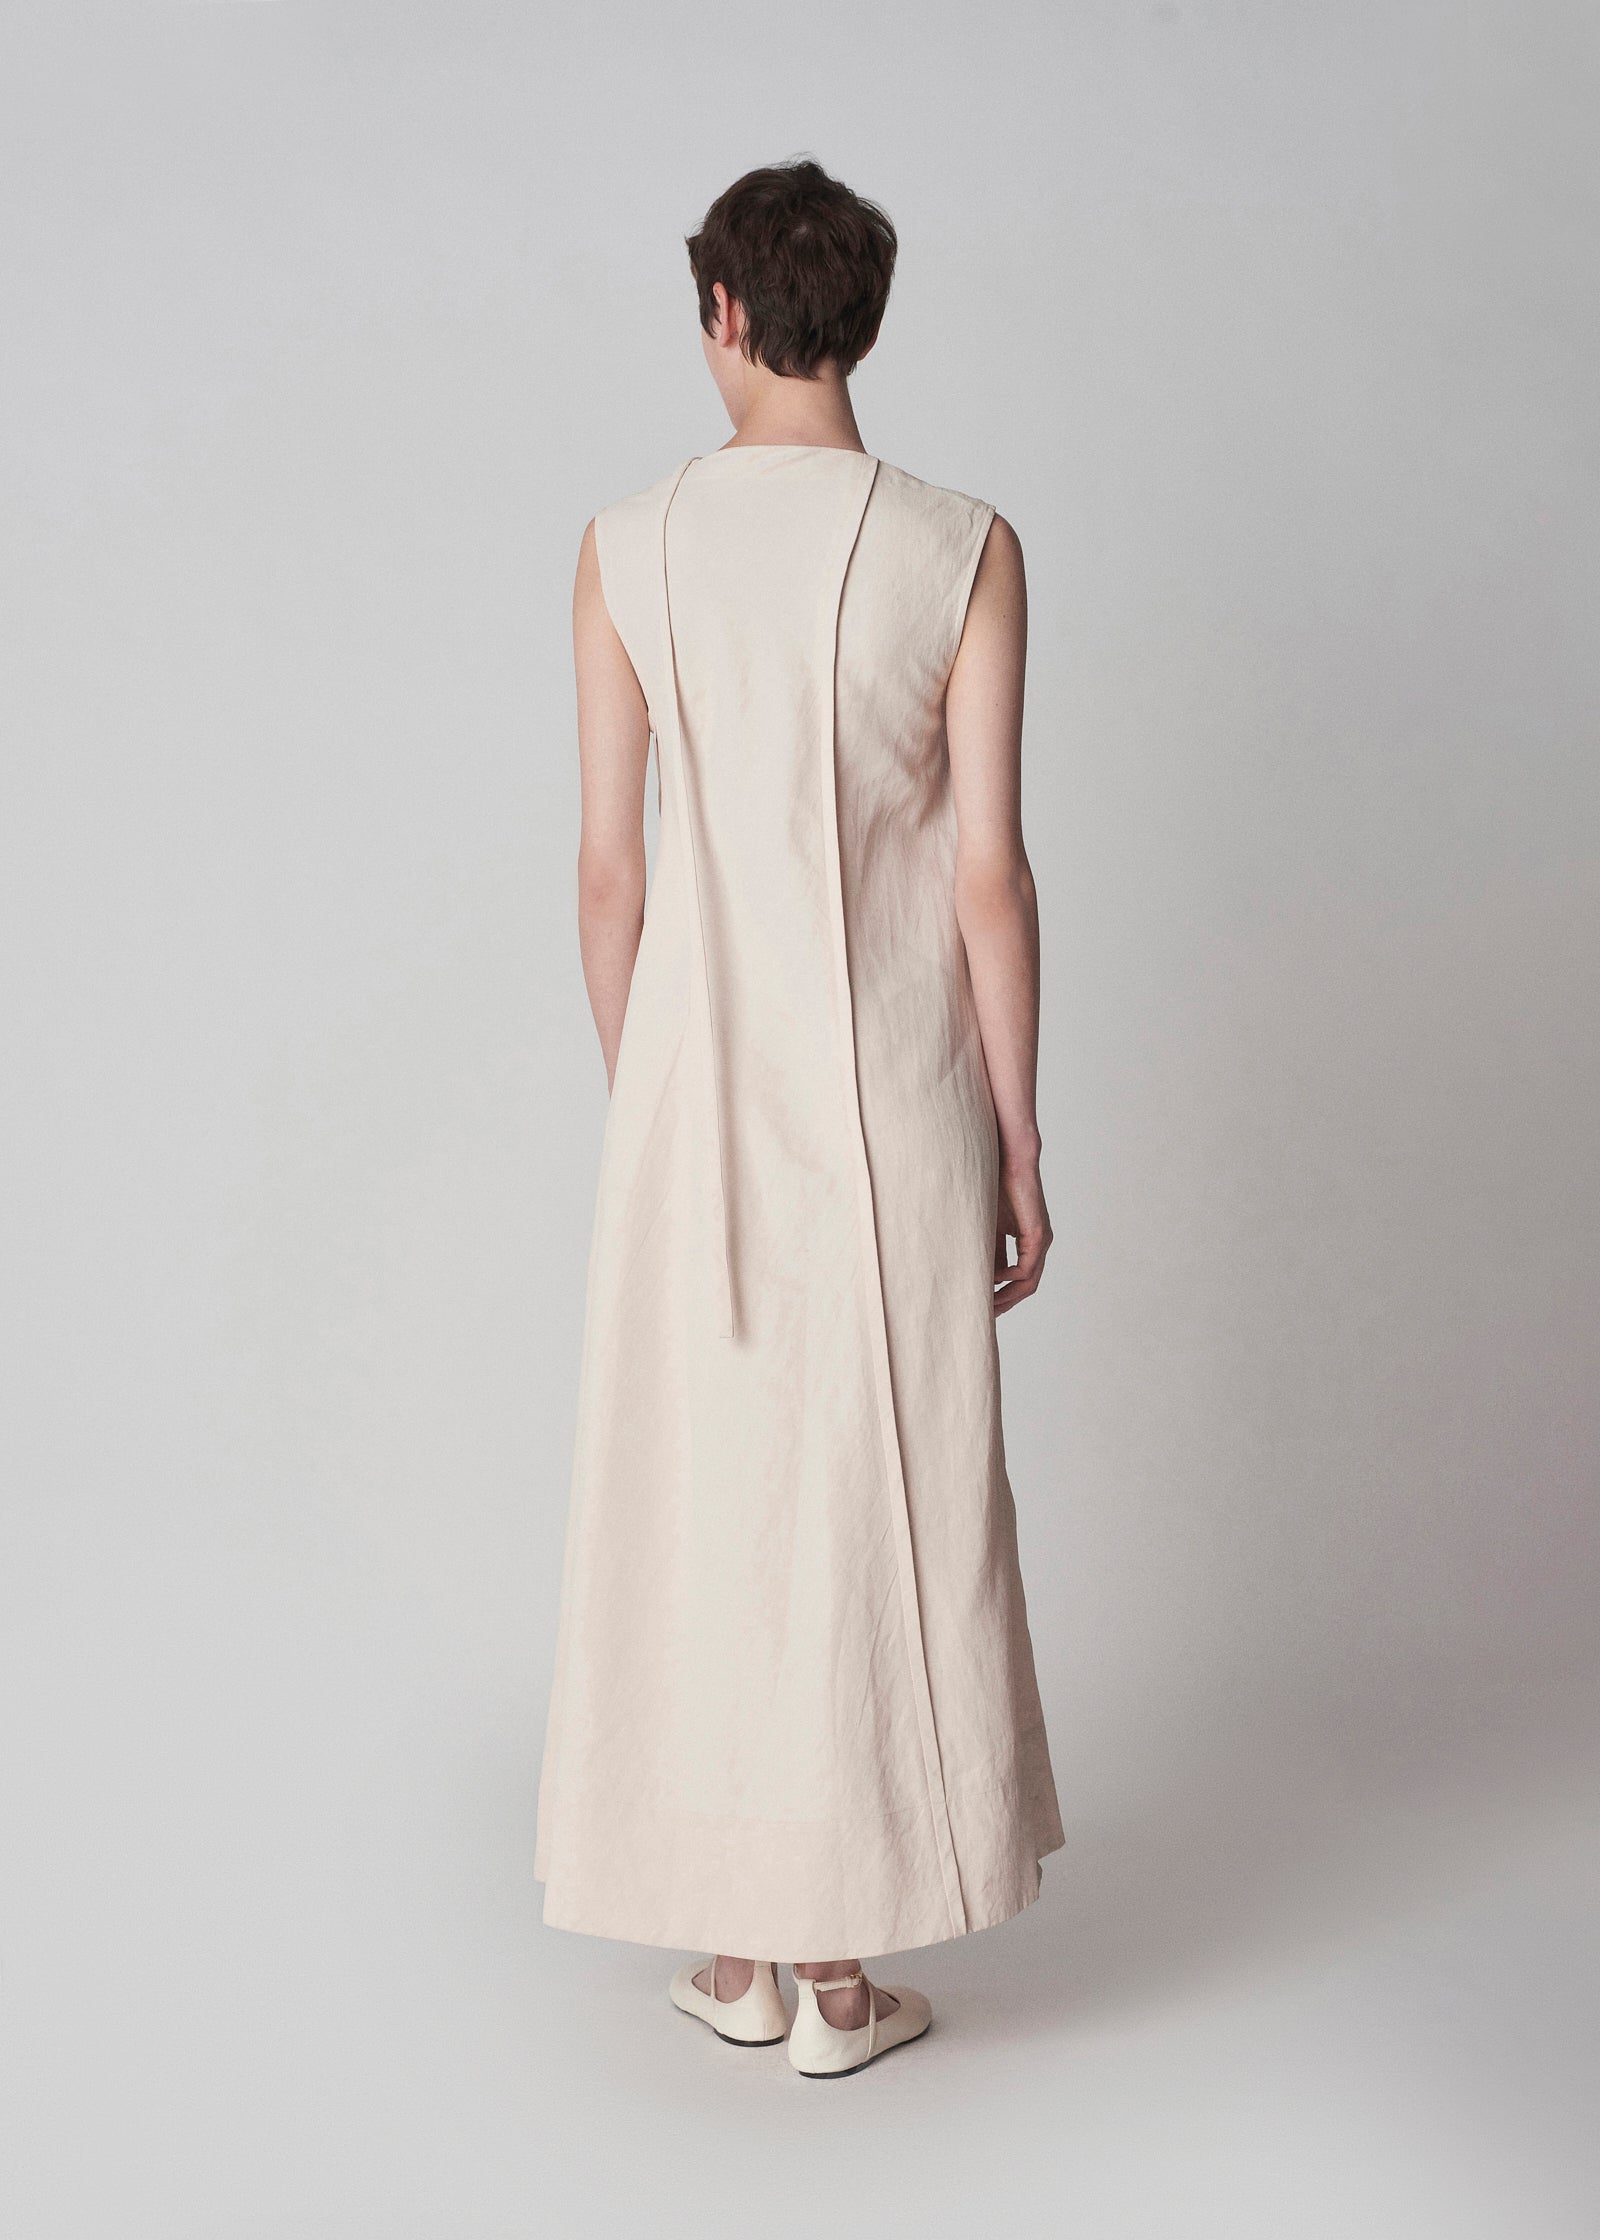 Sleeveless Long Slip Dress in Whisper Pink - CO Collections